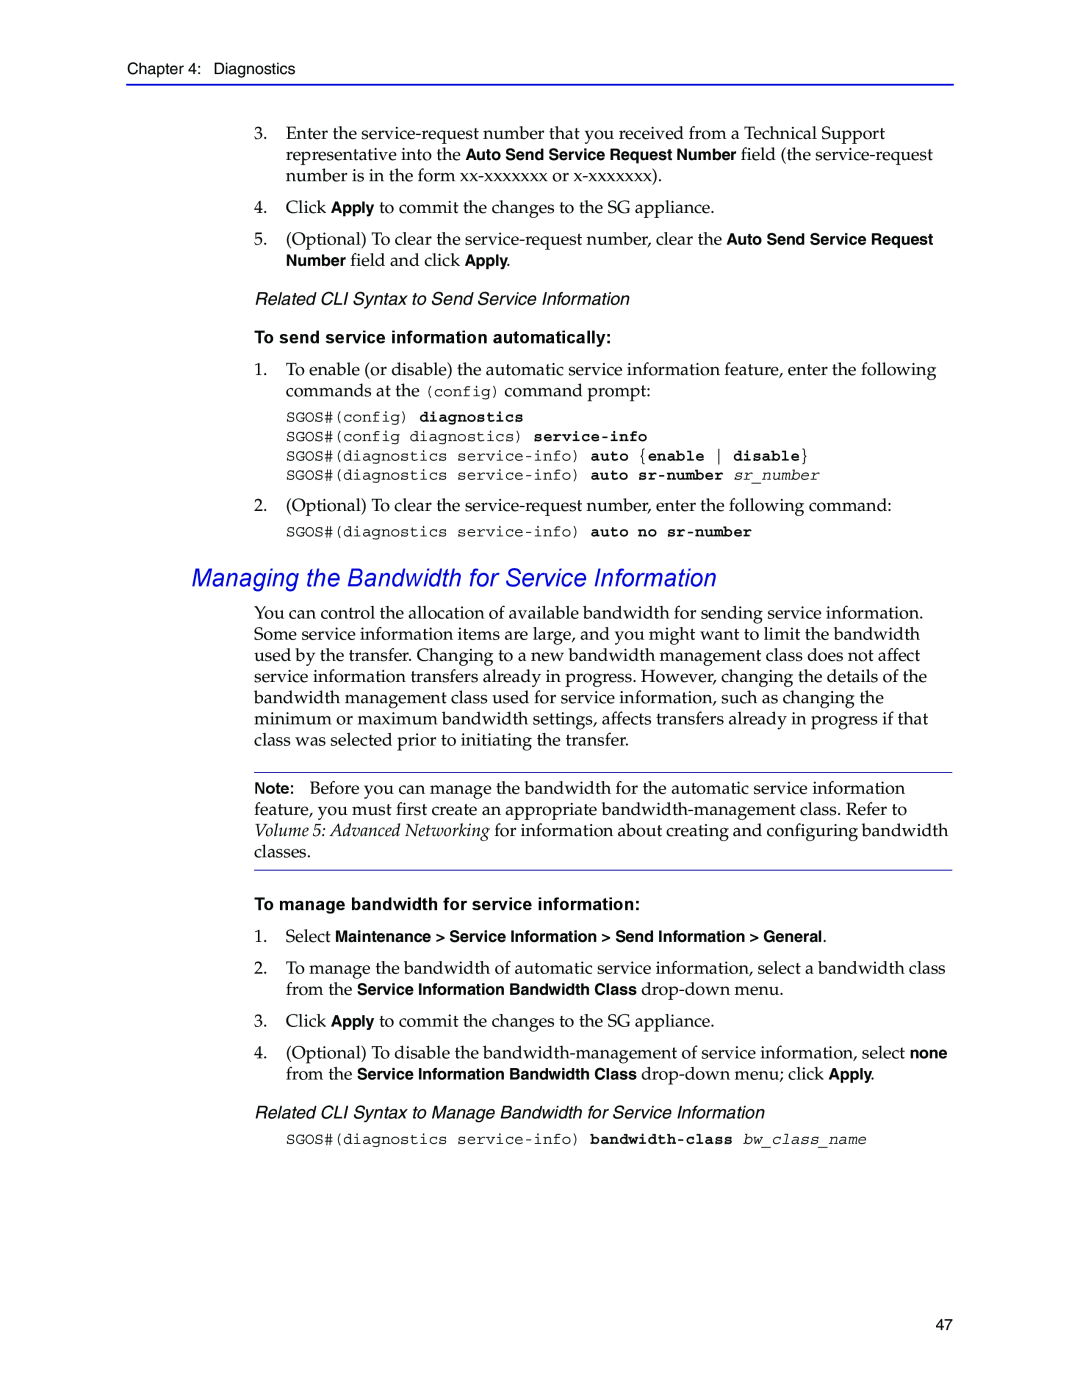 Blue Coat Systems Blue Coat Systems SG Appliance, SGOS Version 5.2.2 manual Managing the Bandwidth for Service Information 